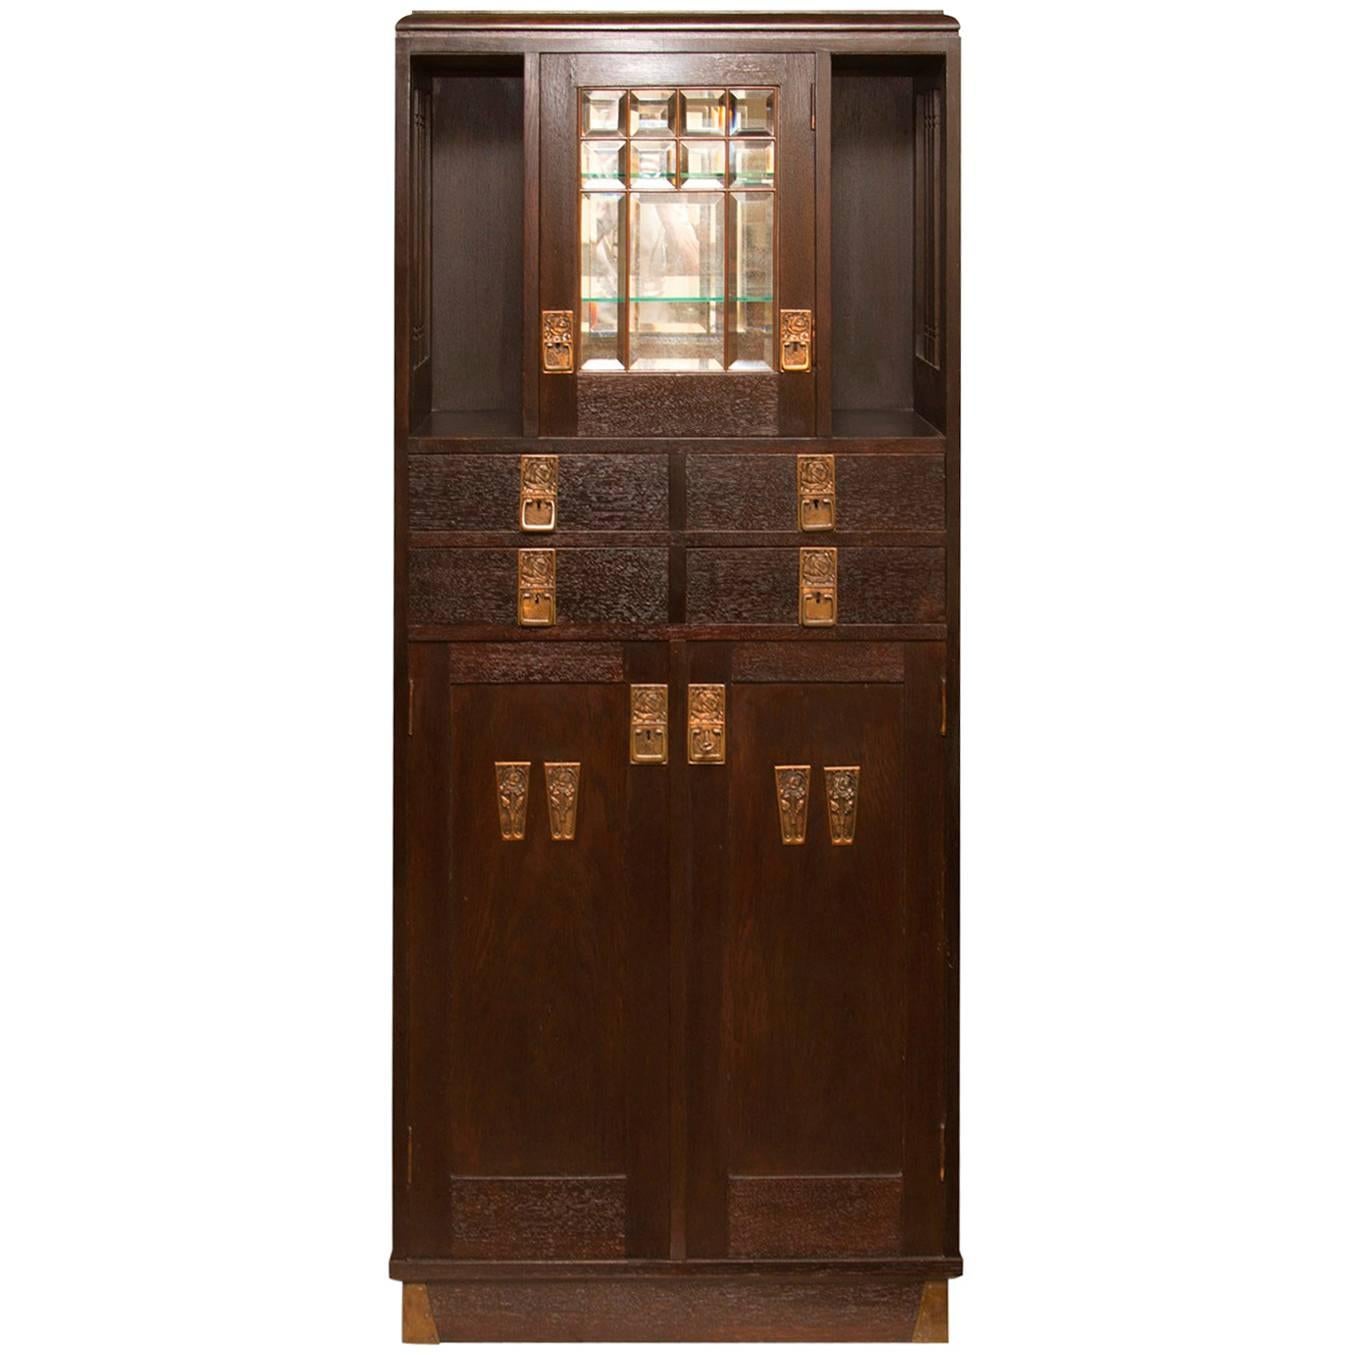 Early 20th Century Viennese Secession Bar Cabinet or Sideboard in Oak, 1910